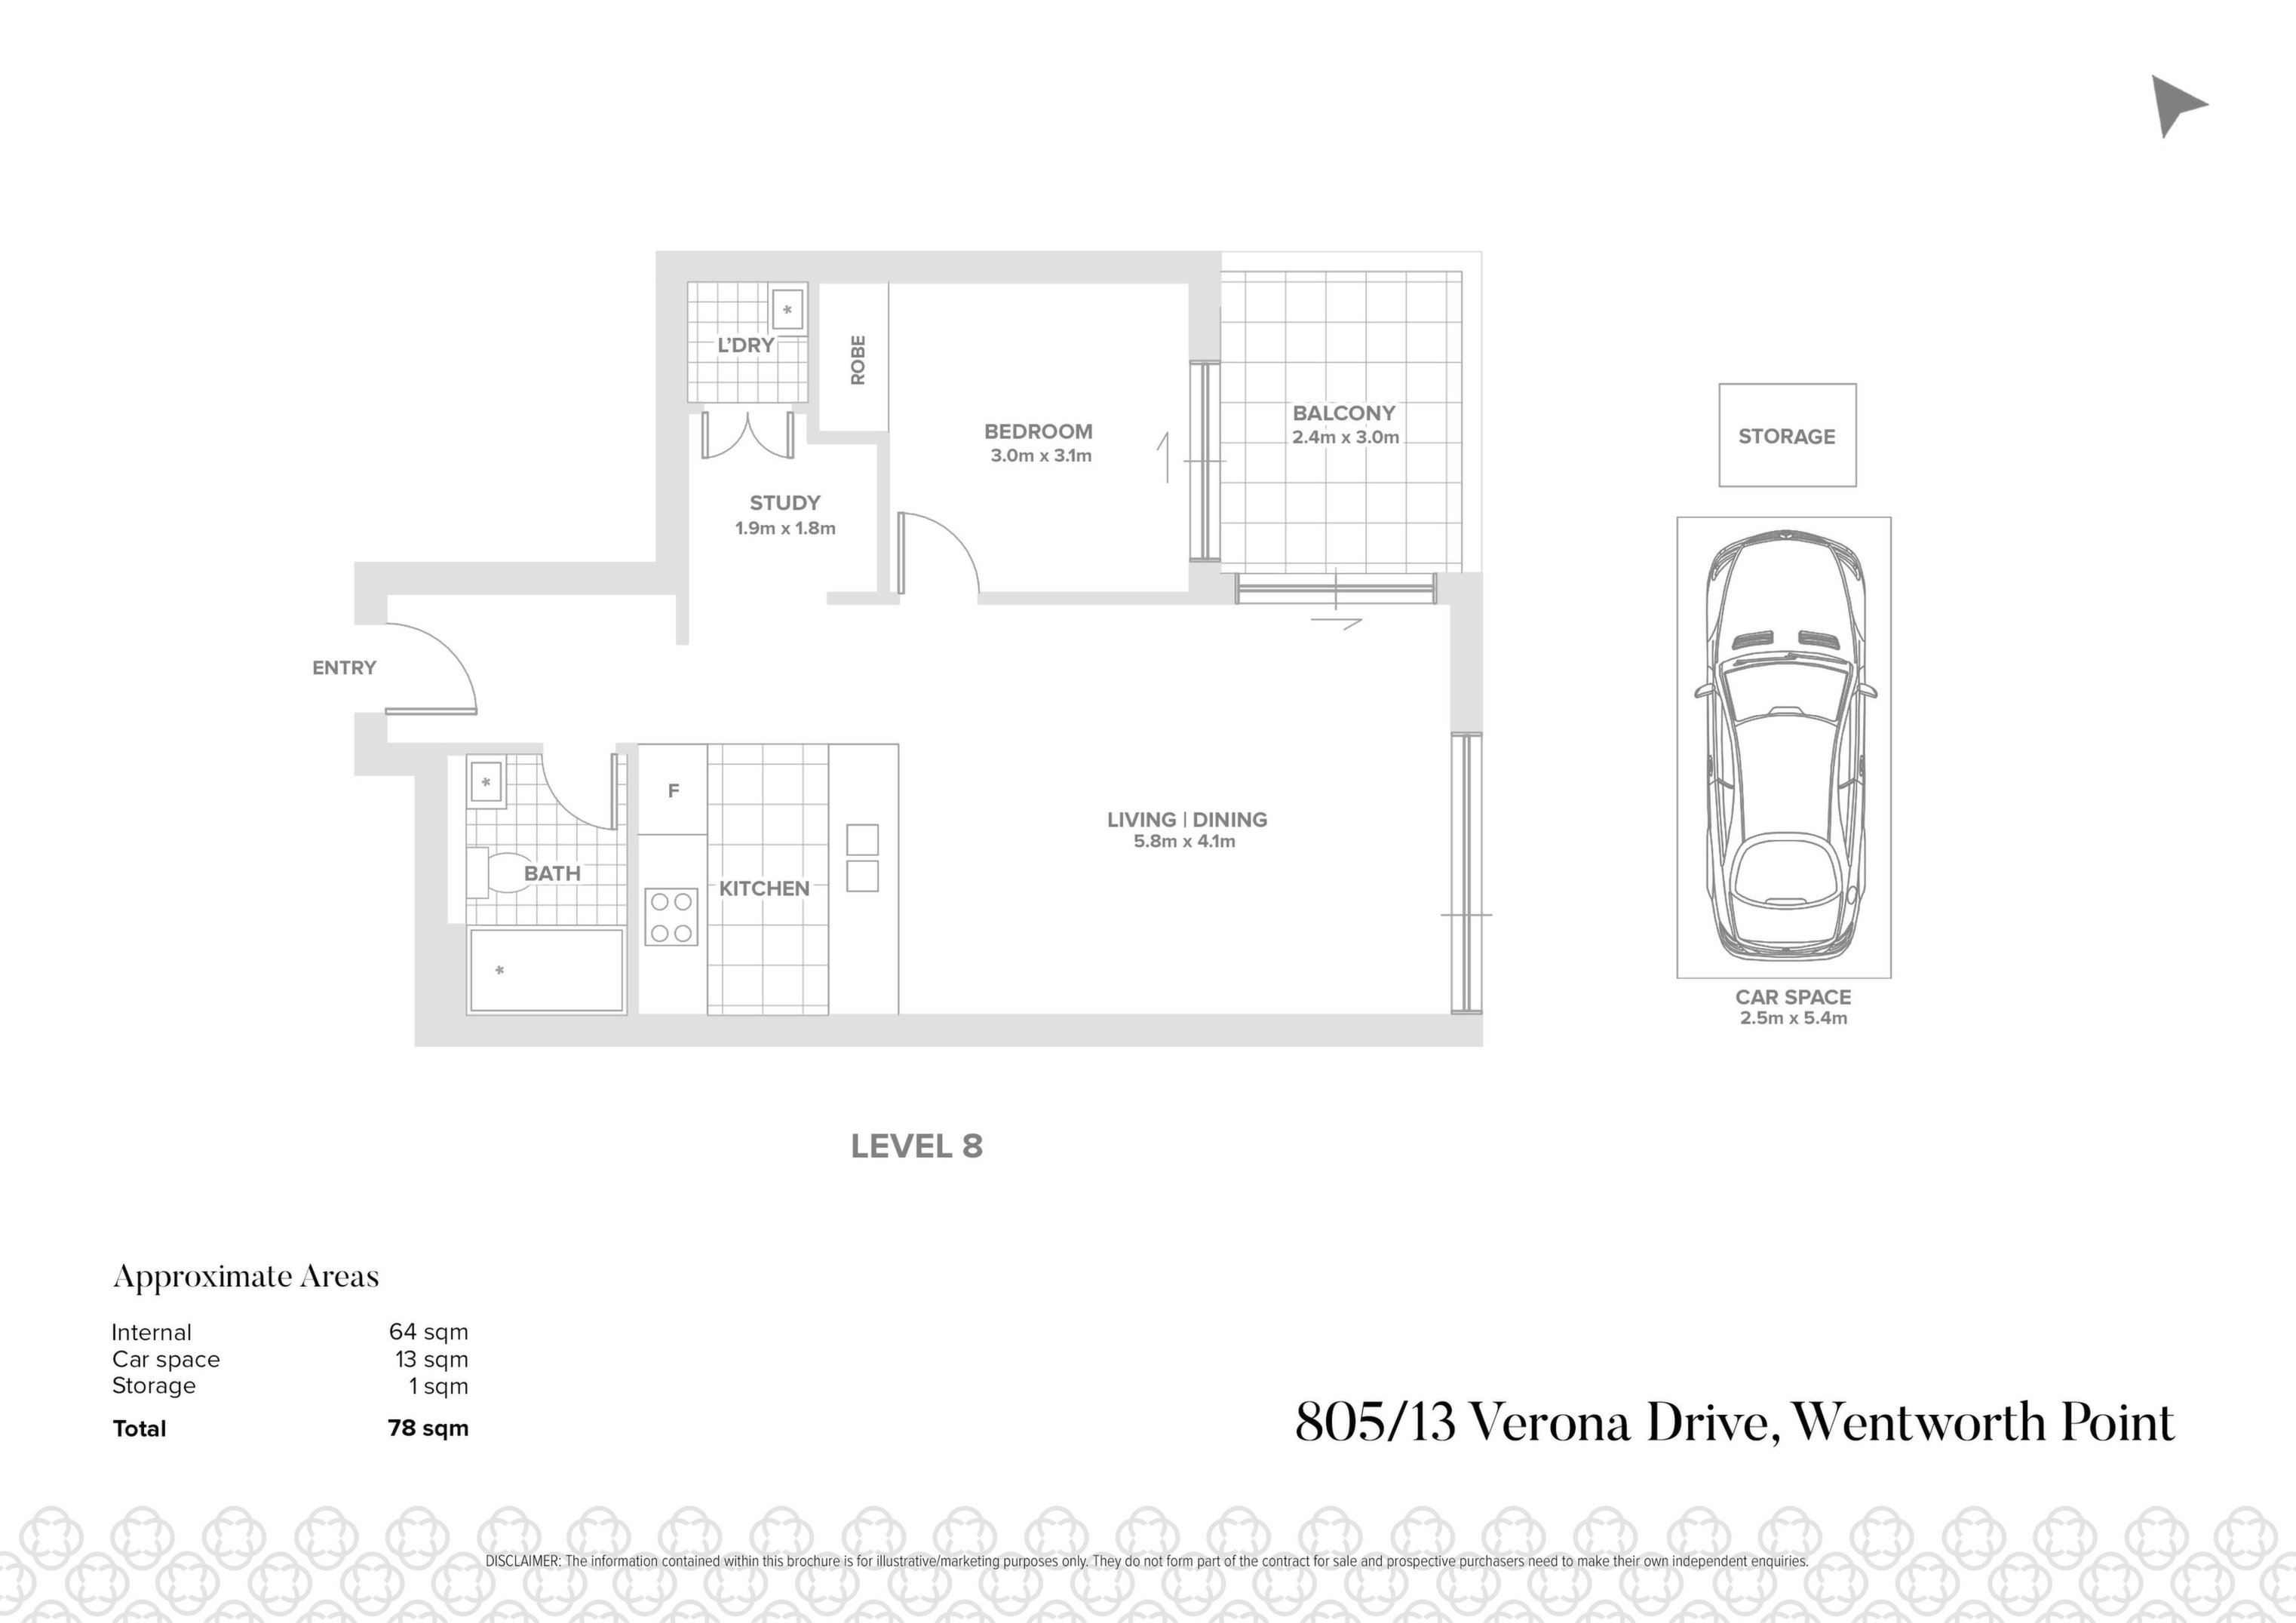 805/13 Verona Drive, Wentworth Point Sold by Chidiac Realty - floorplan